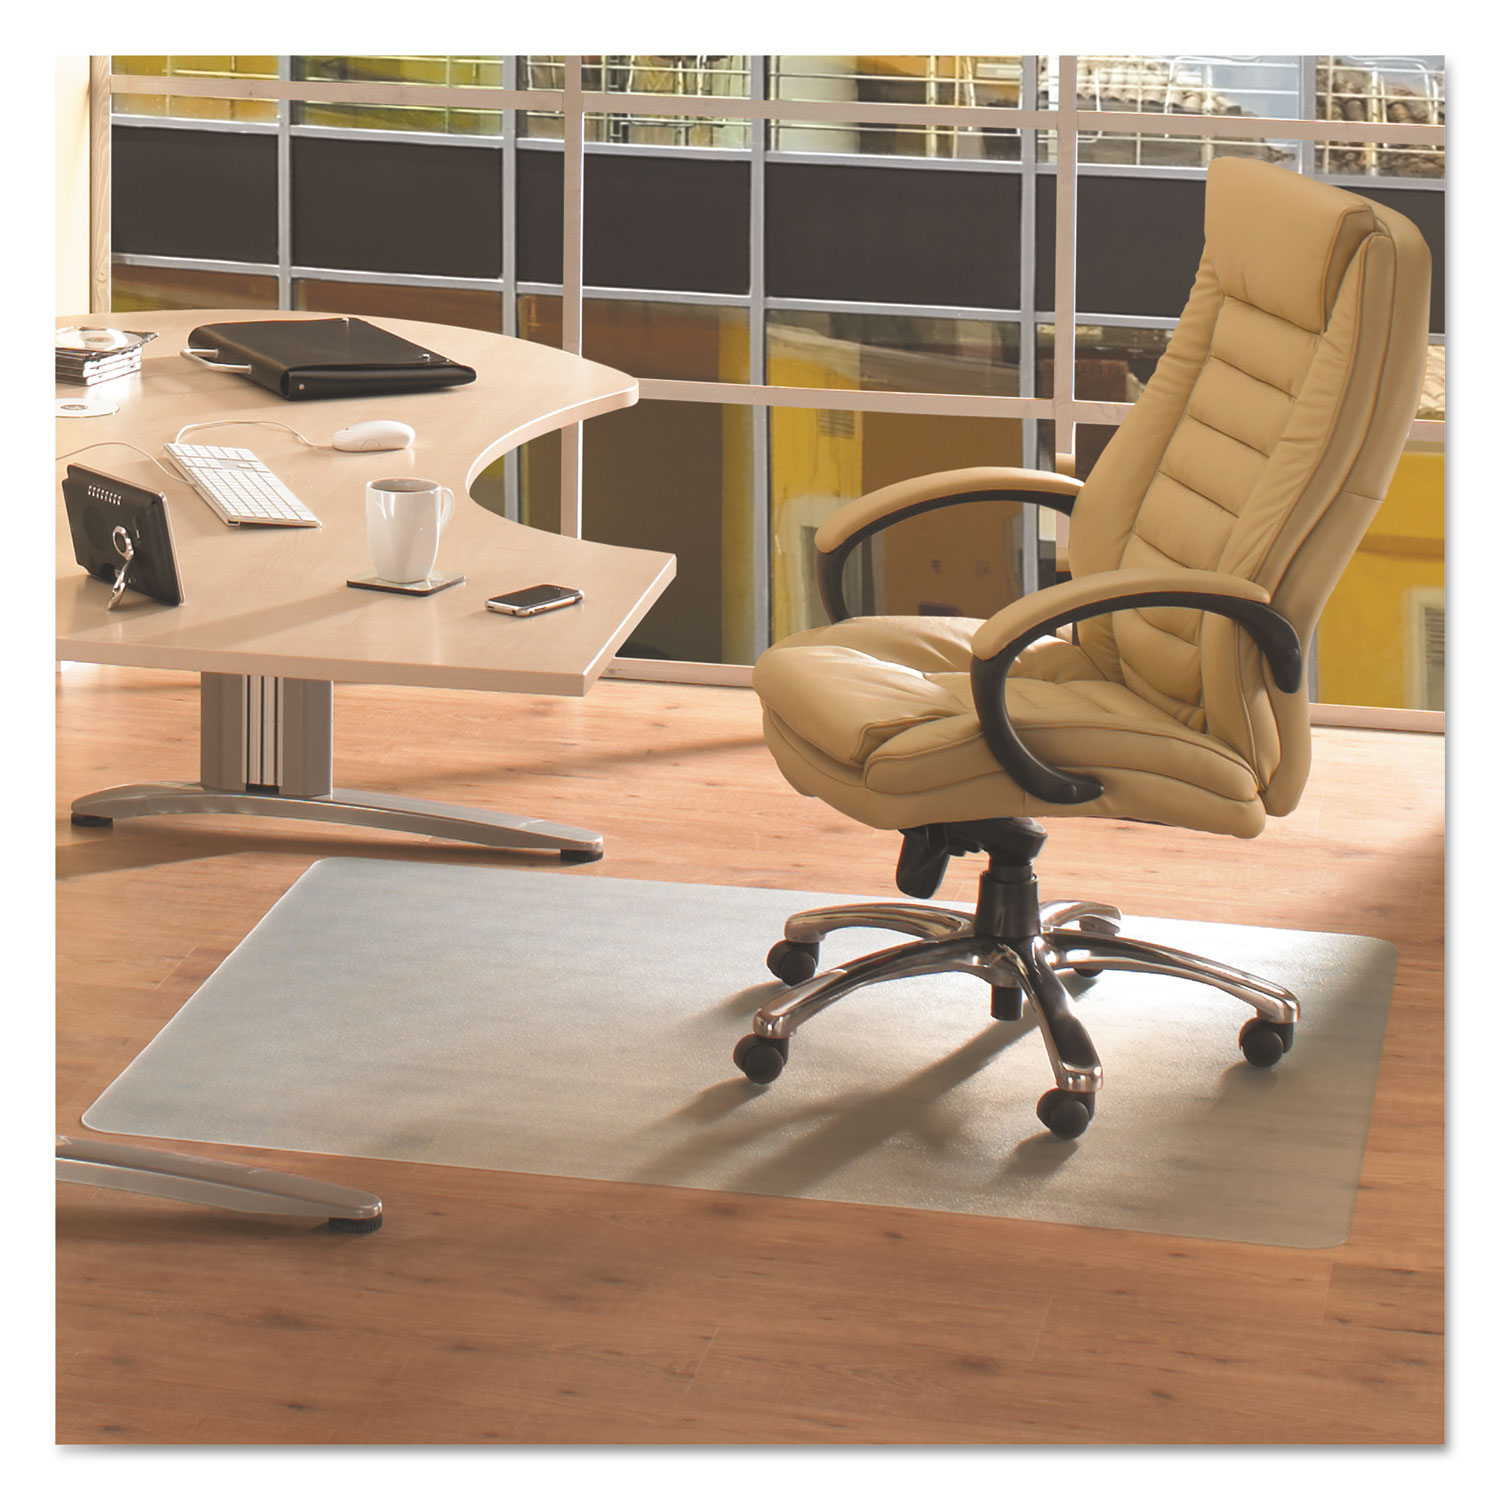 EcoTex Revolutionmat Recycled Chair Mat for Hard Floors, 48 x 30